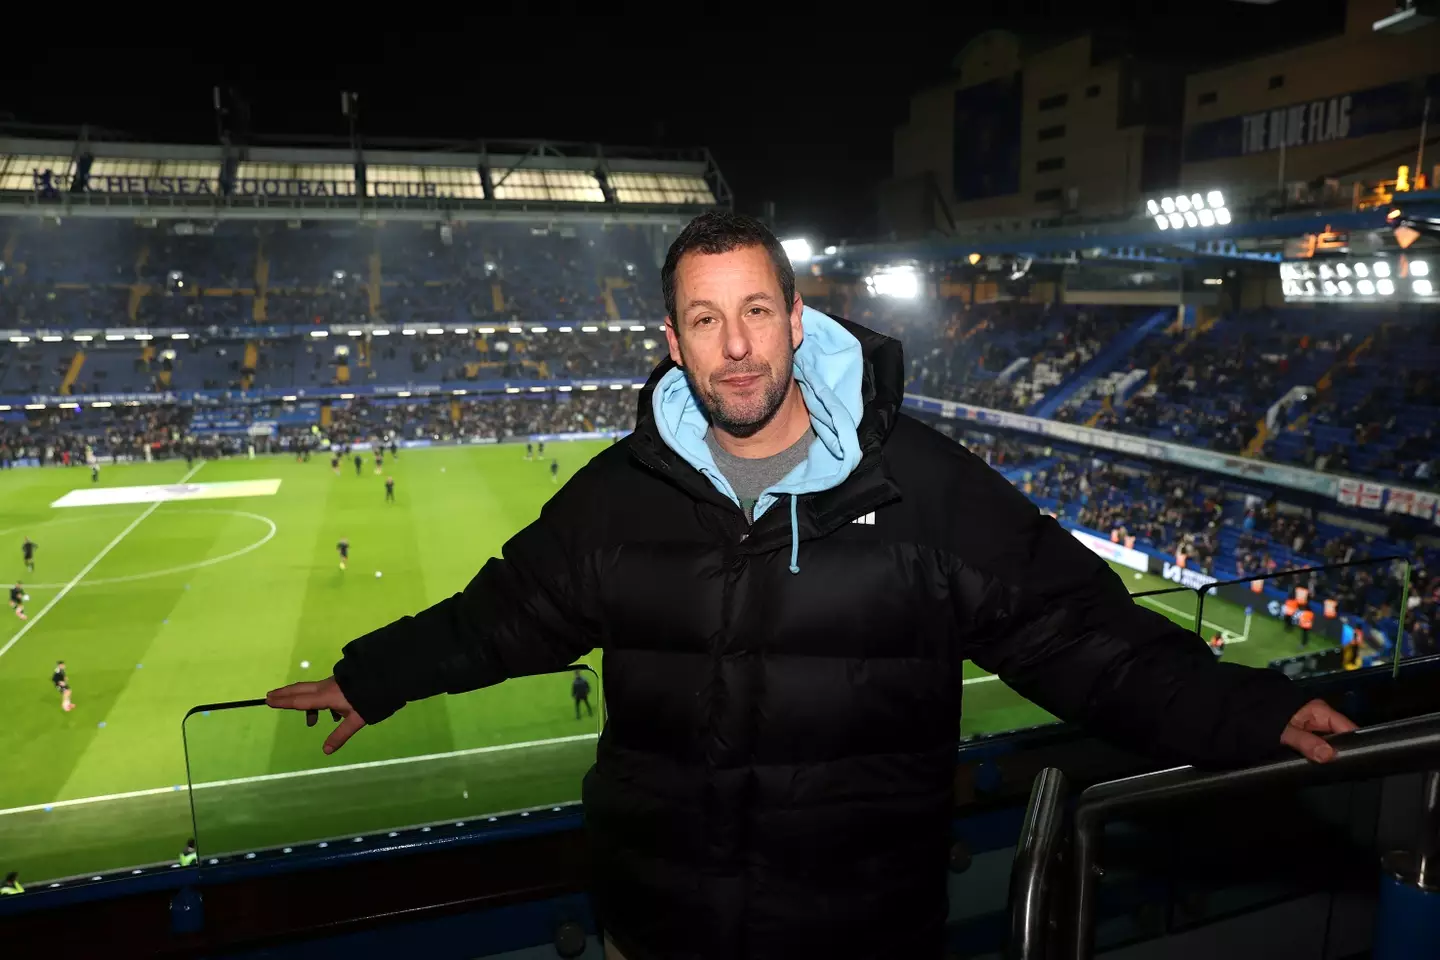 Adam Sandler attends Chelsea v Newcastle United in the Premier League (Image: Getty)